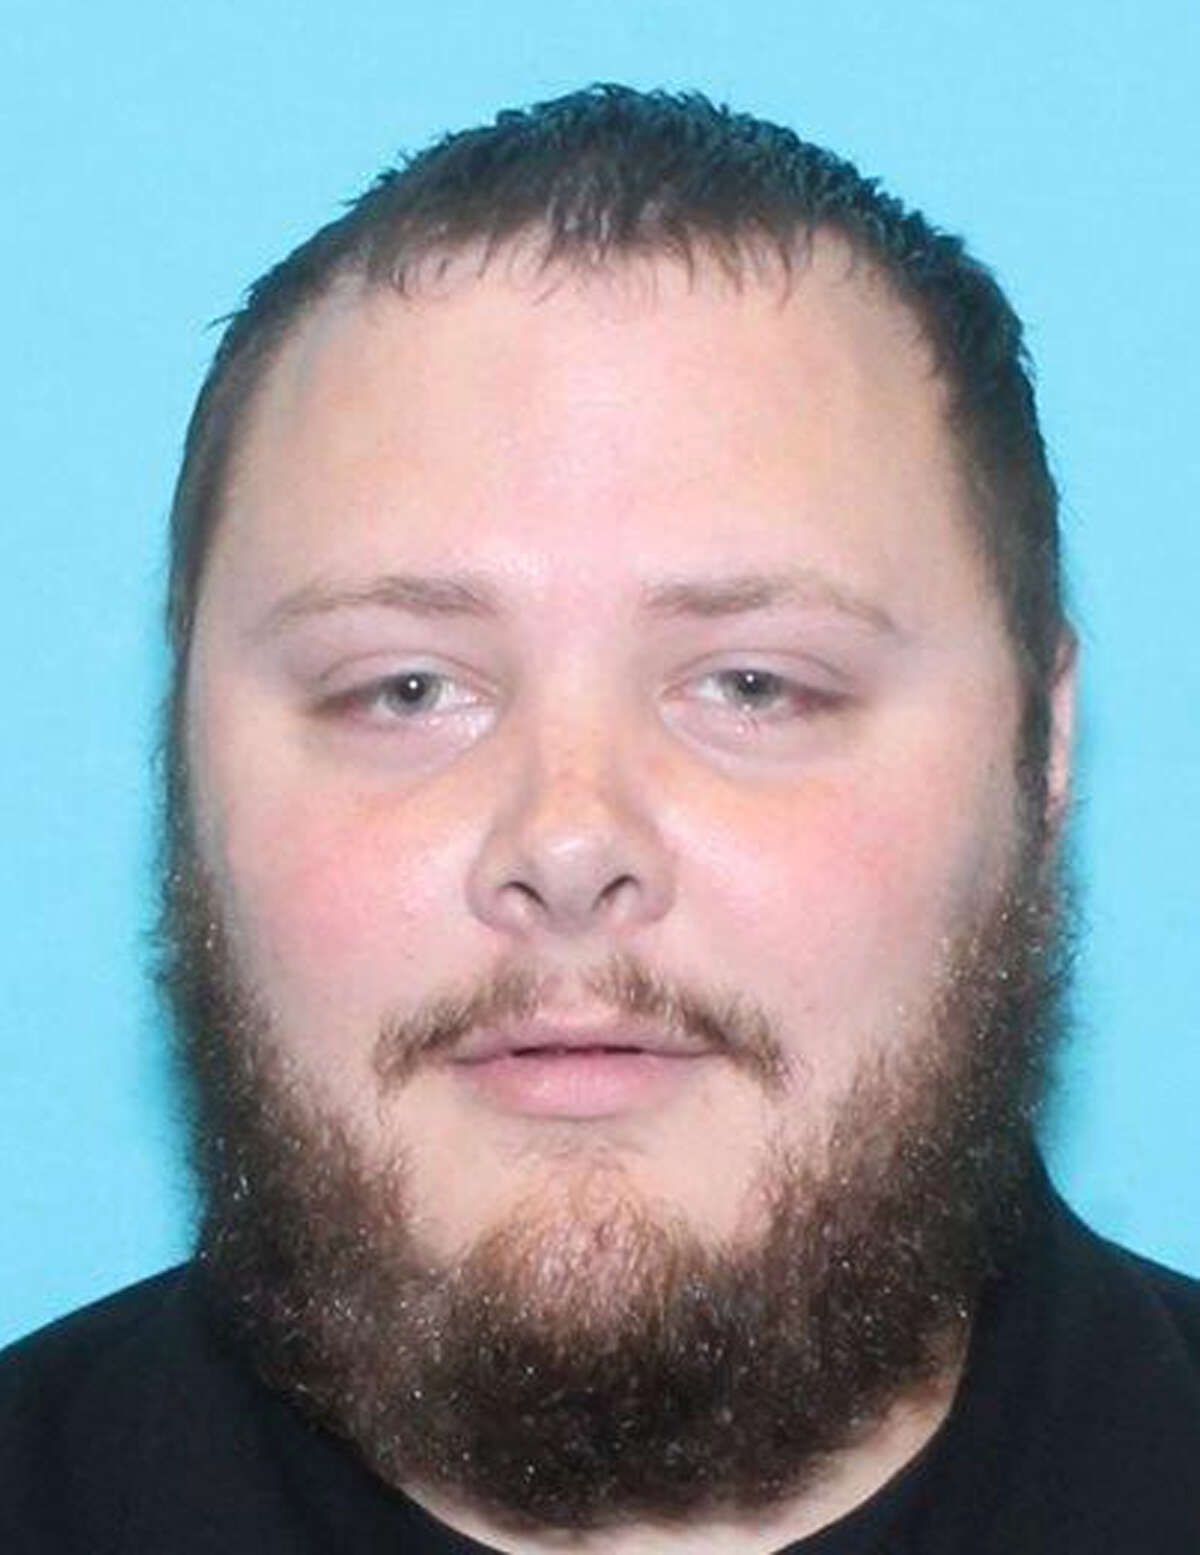 This undated photo provided by the Texas Department of Public Safety shows Devin Kelley, the suspect in the shooting at the First Baptist Church in Sutherland Springs, Texas, on Sunday, Nov. 5, 2017. A short time after the shooting, Kelley was found dead in his vehicle. (Texas Department of Public Safety via AP)